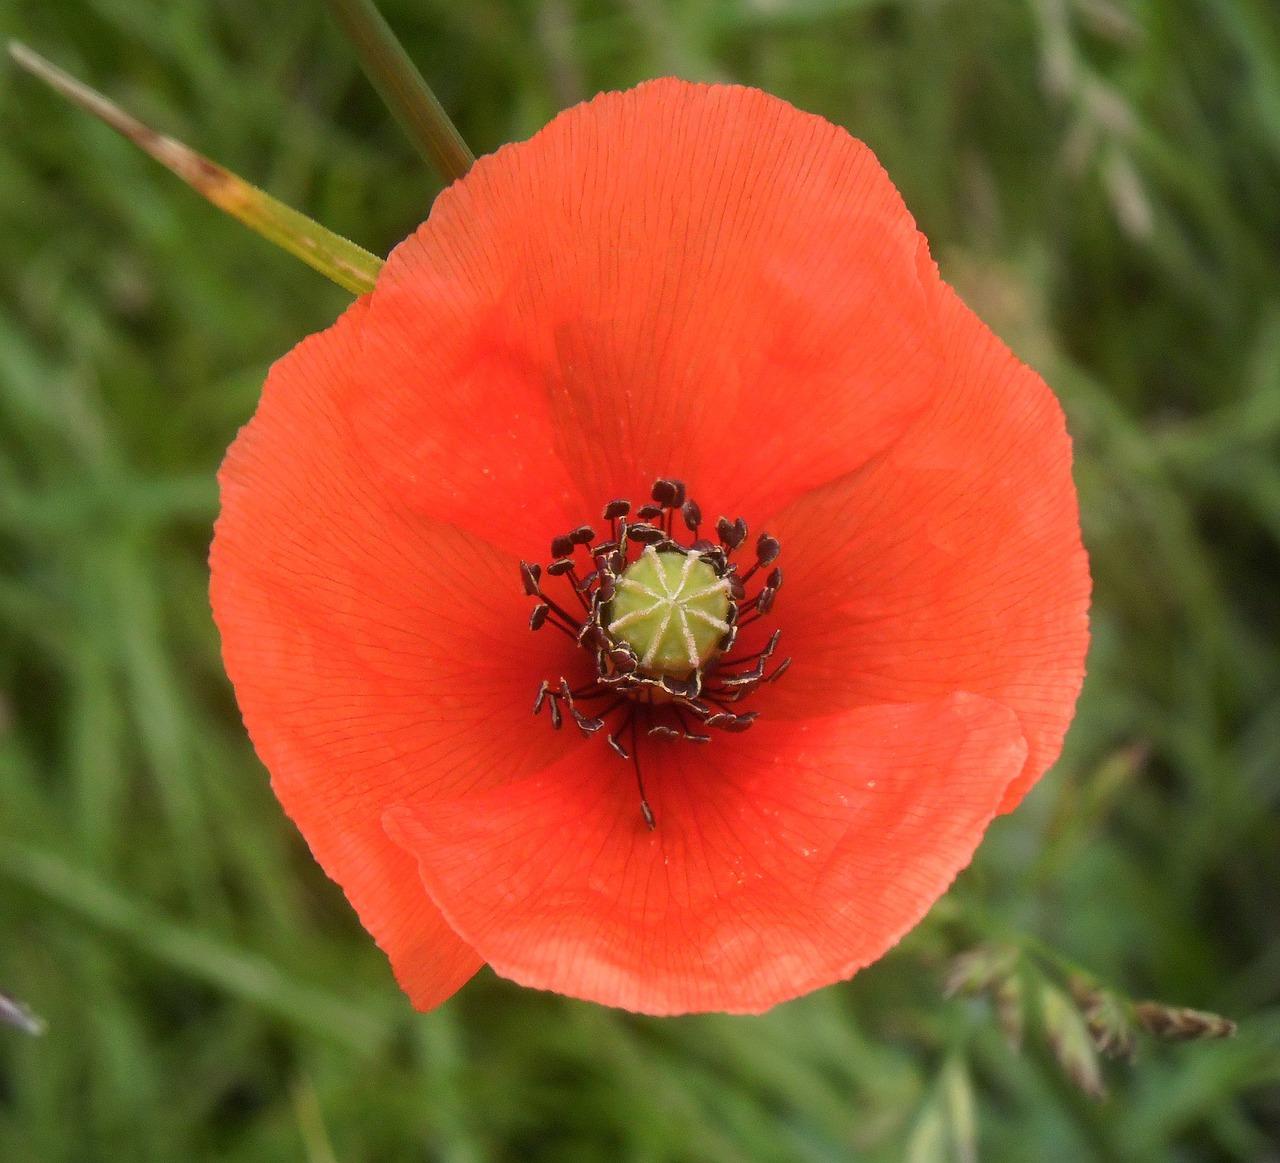 How Many Petals Do Poppies Have 